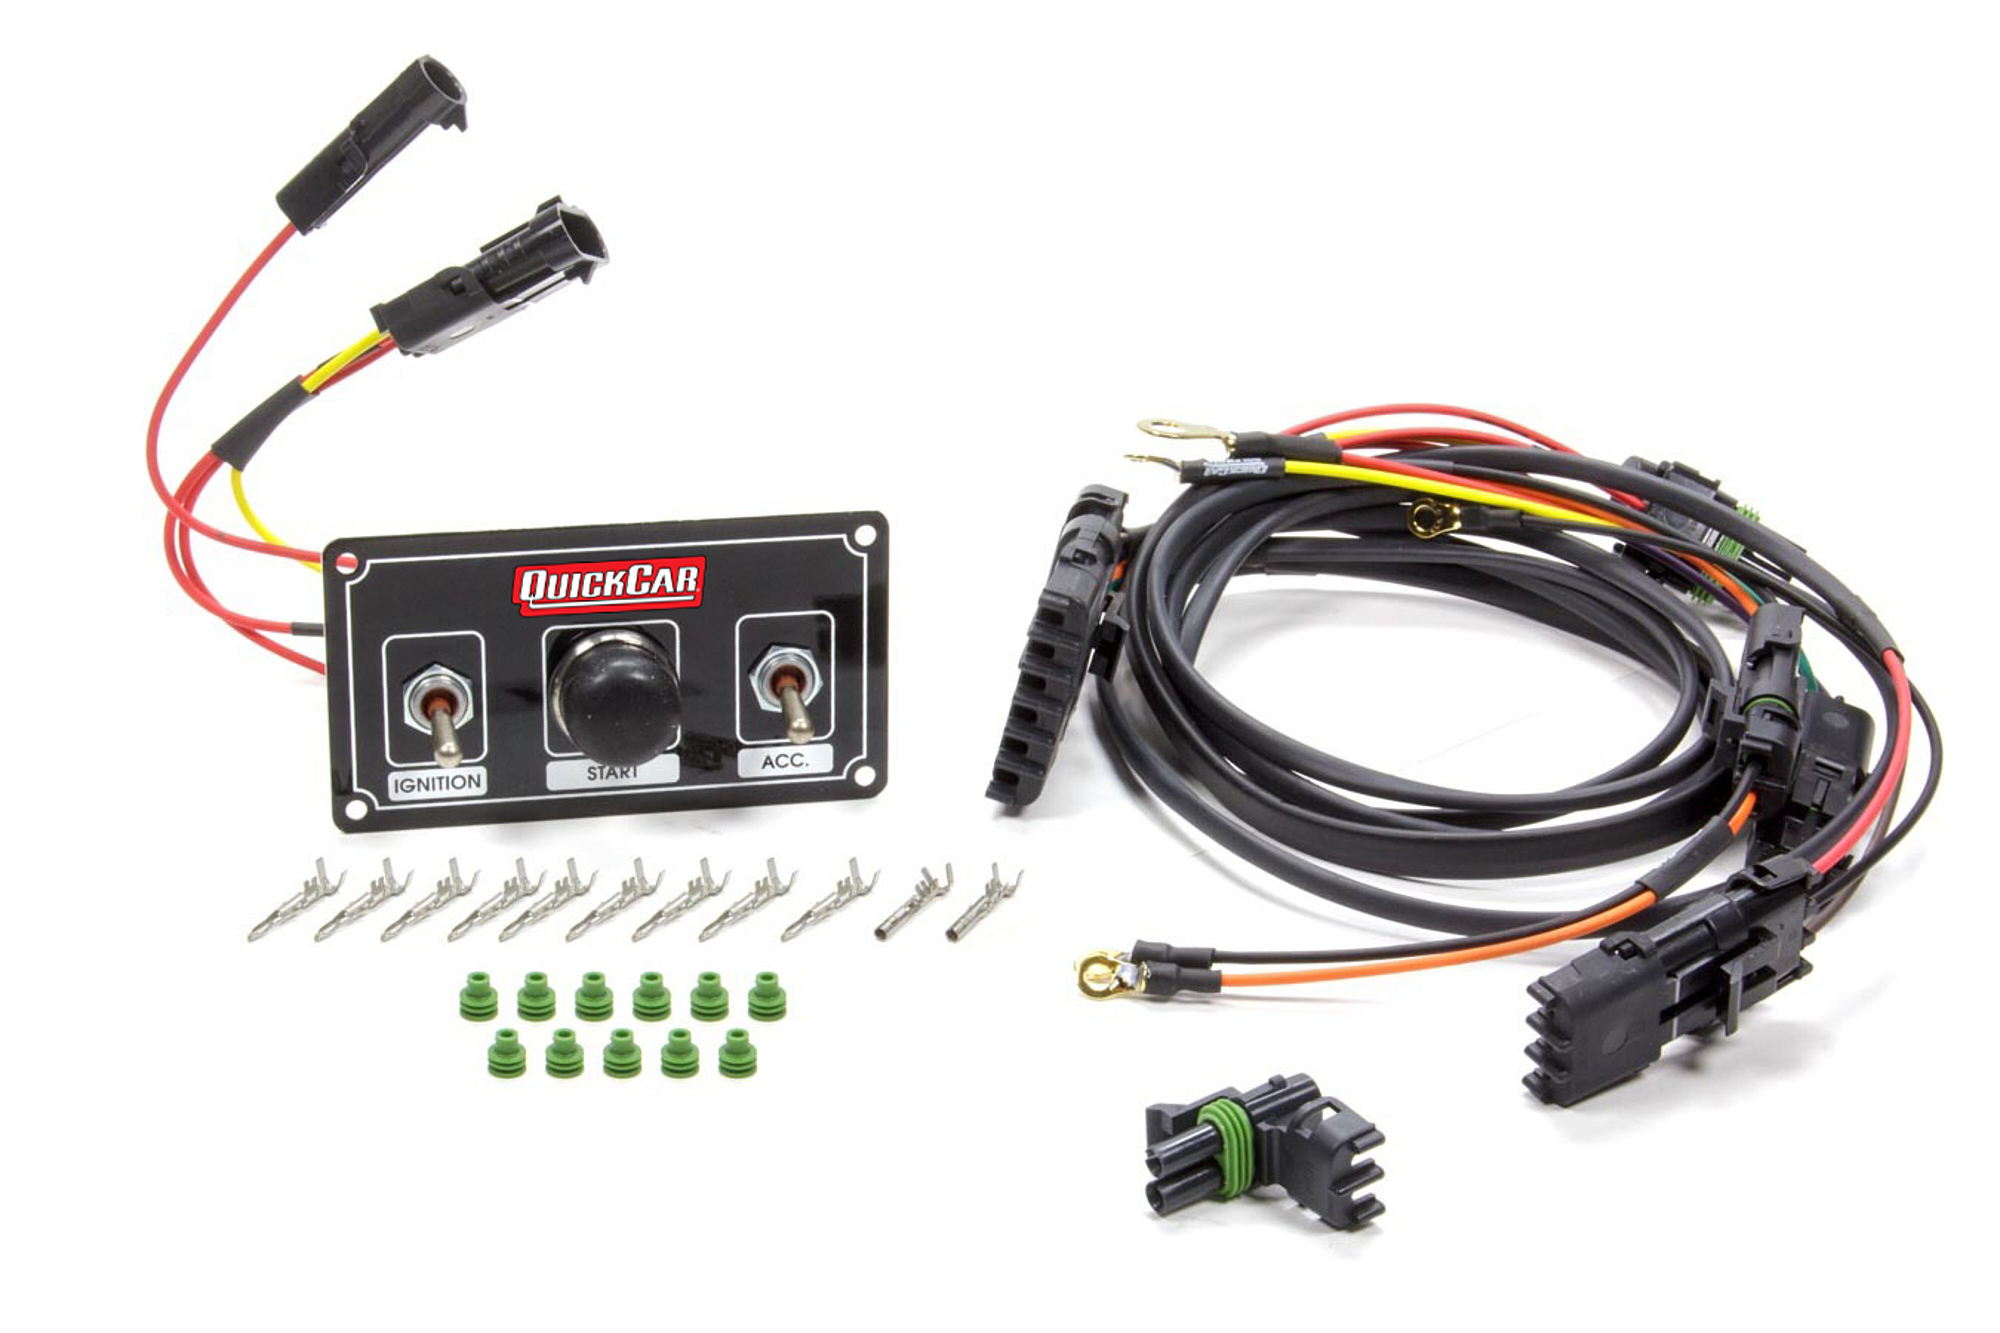 QuickCar 50-2037 Ignition Wiring Harness, Weatherpack Style, Switch Panel Included, 2 Toggles / 1 Momentary Push Button, Black Face, UMP / IMCA Style Modifieds, Kit